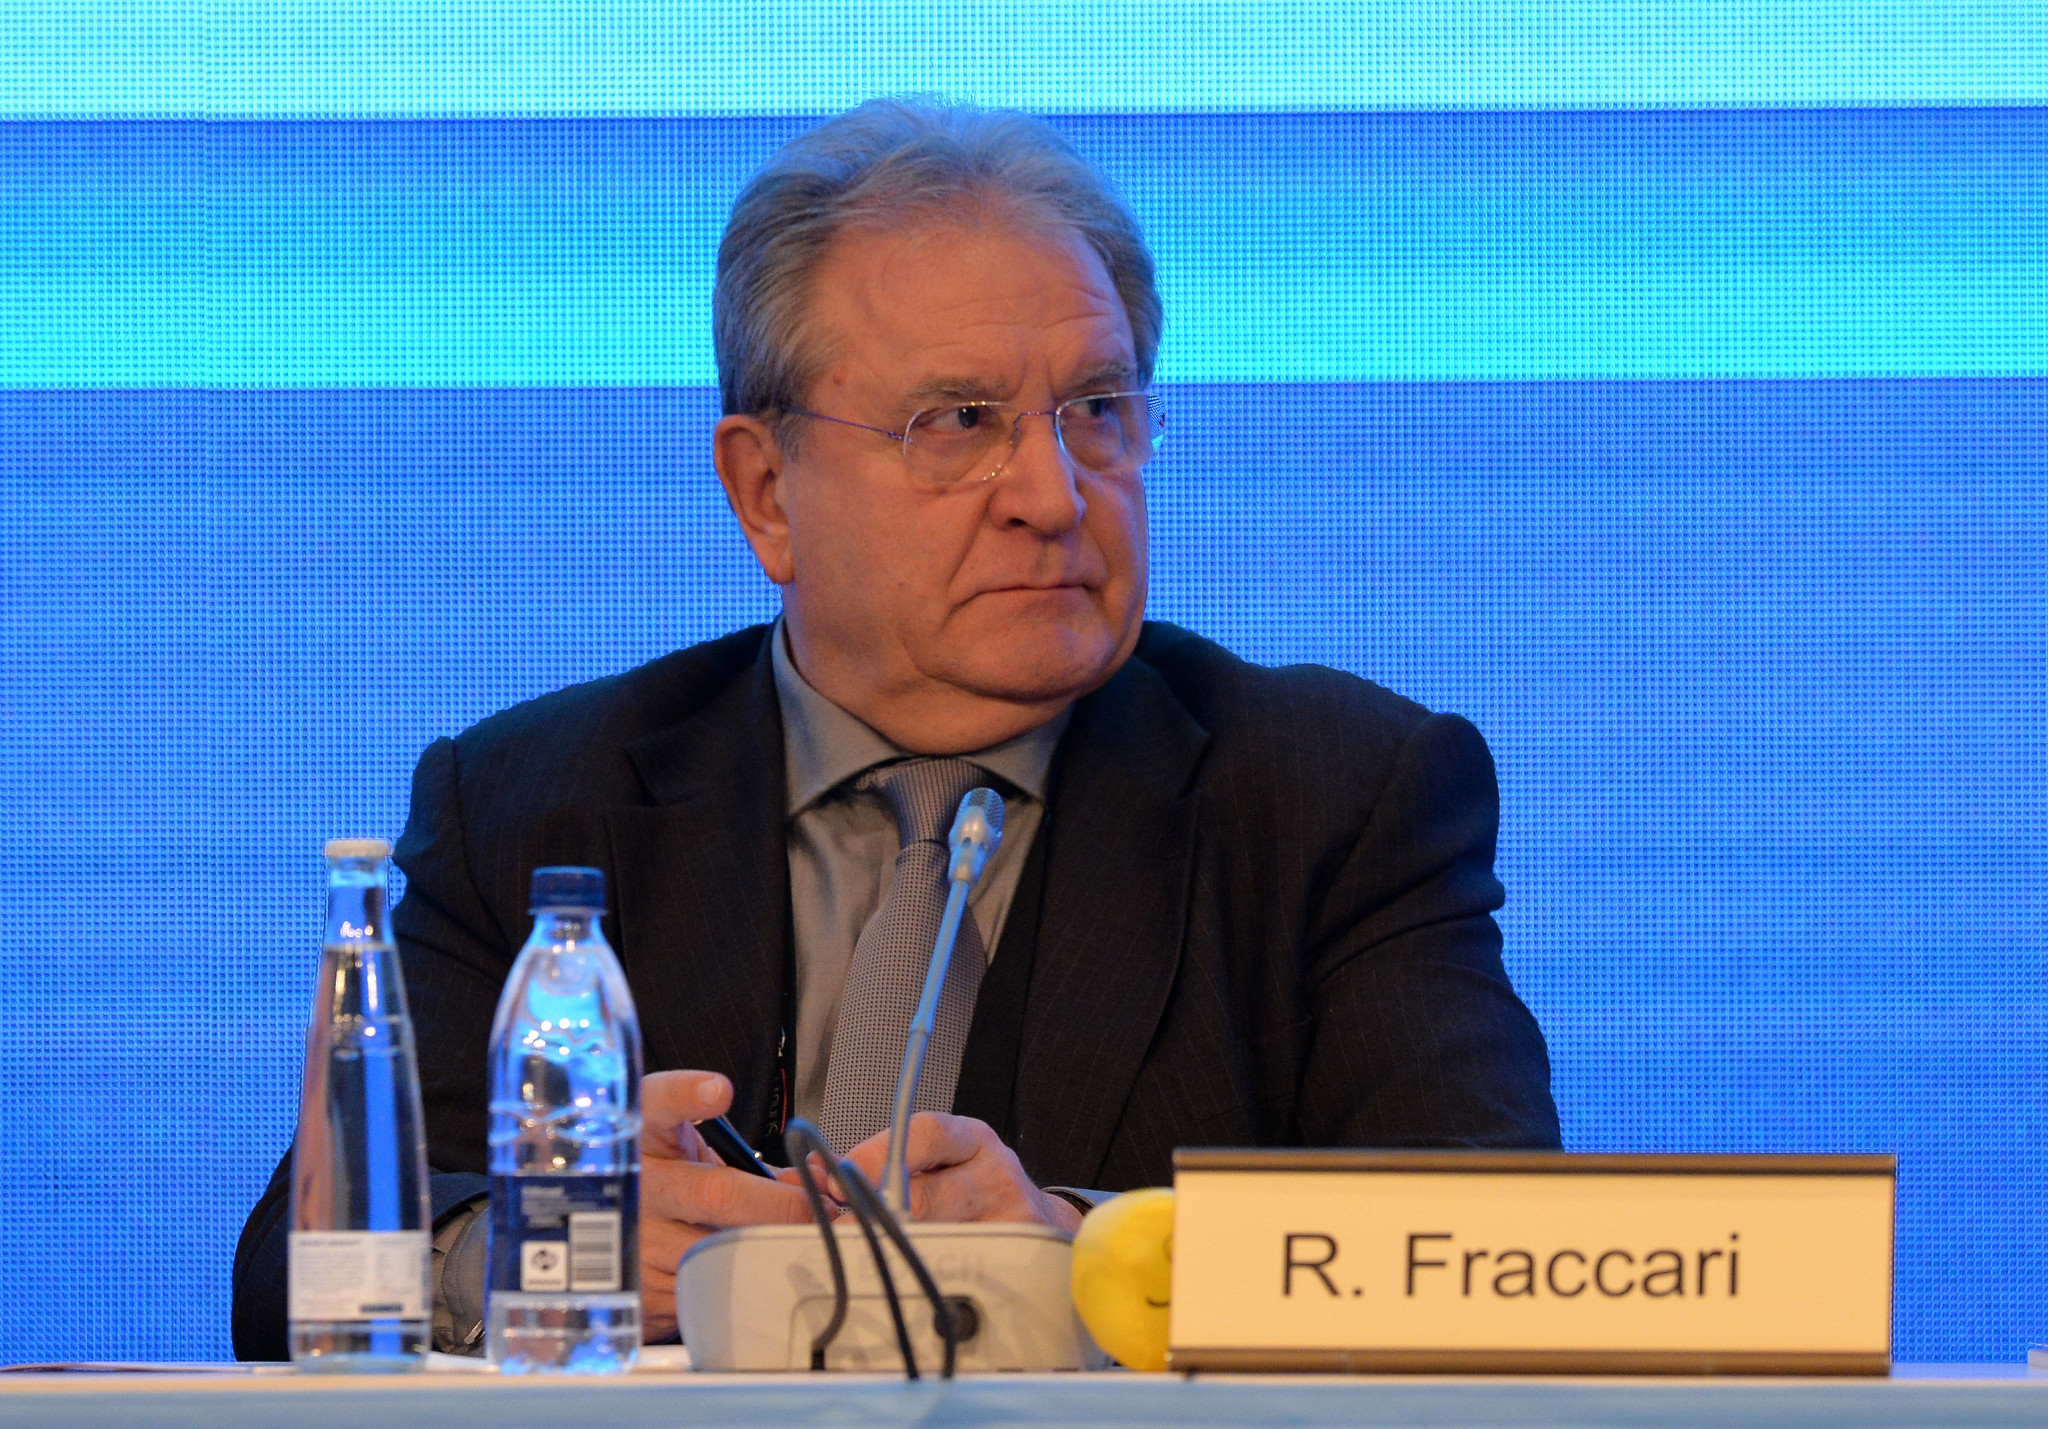 Fraccari urges baseball and softball to "come together to help refugees"